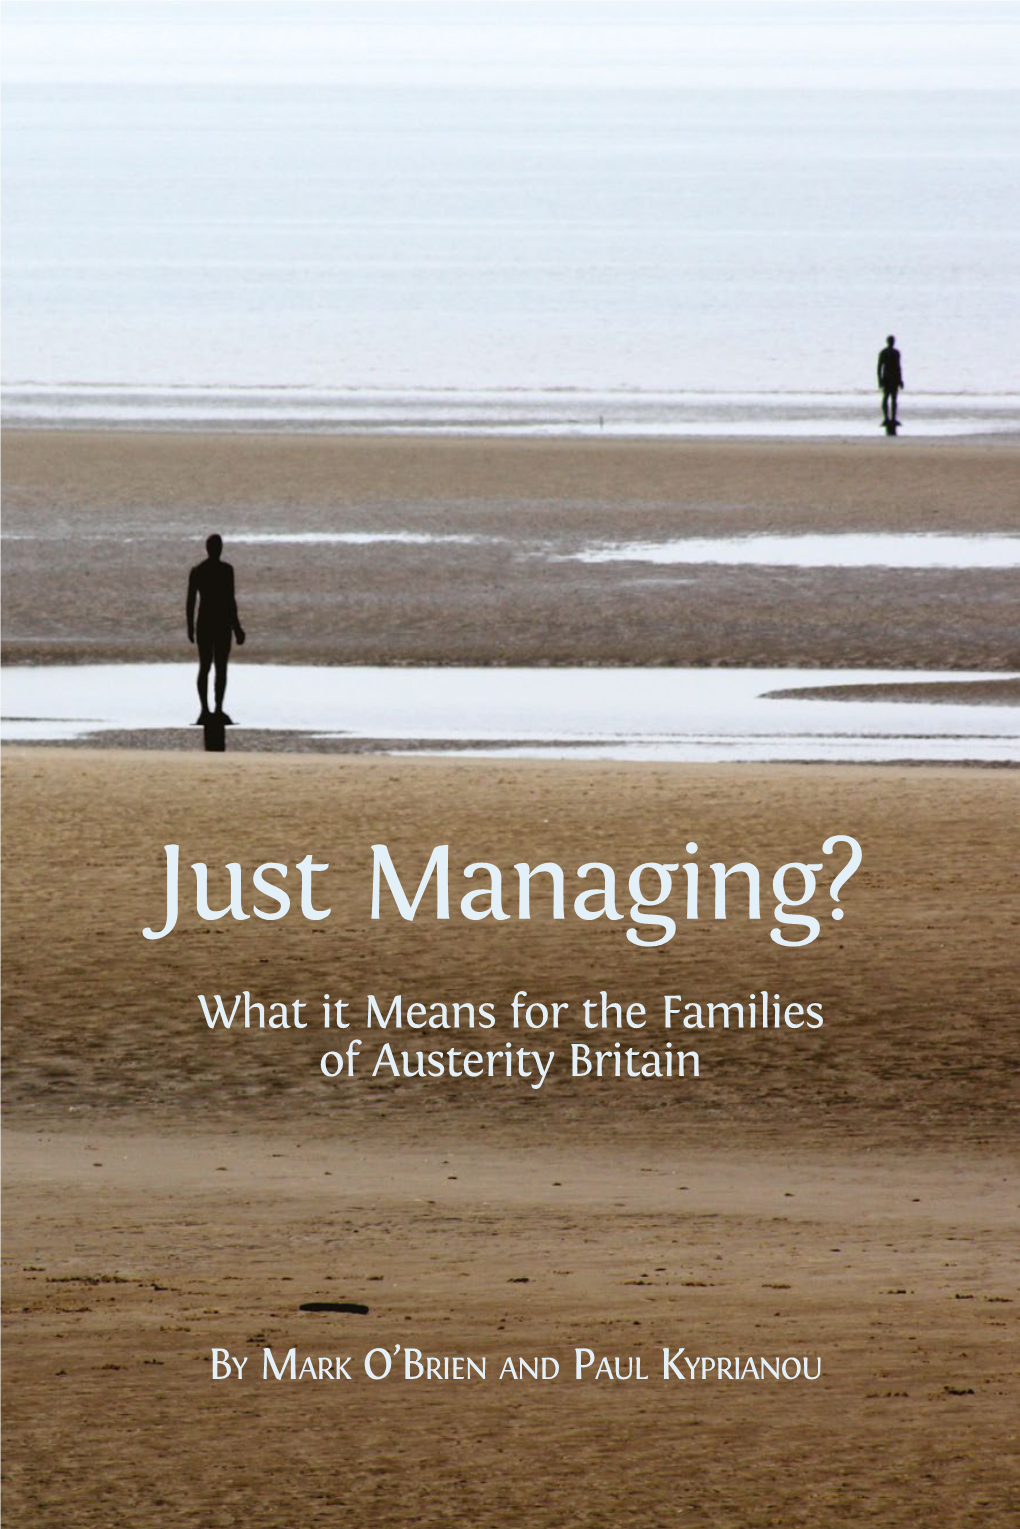 Just Managing? What It Means for the Families of Austerity Britain